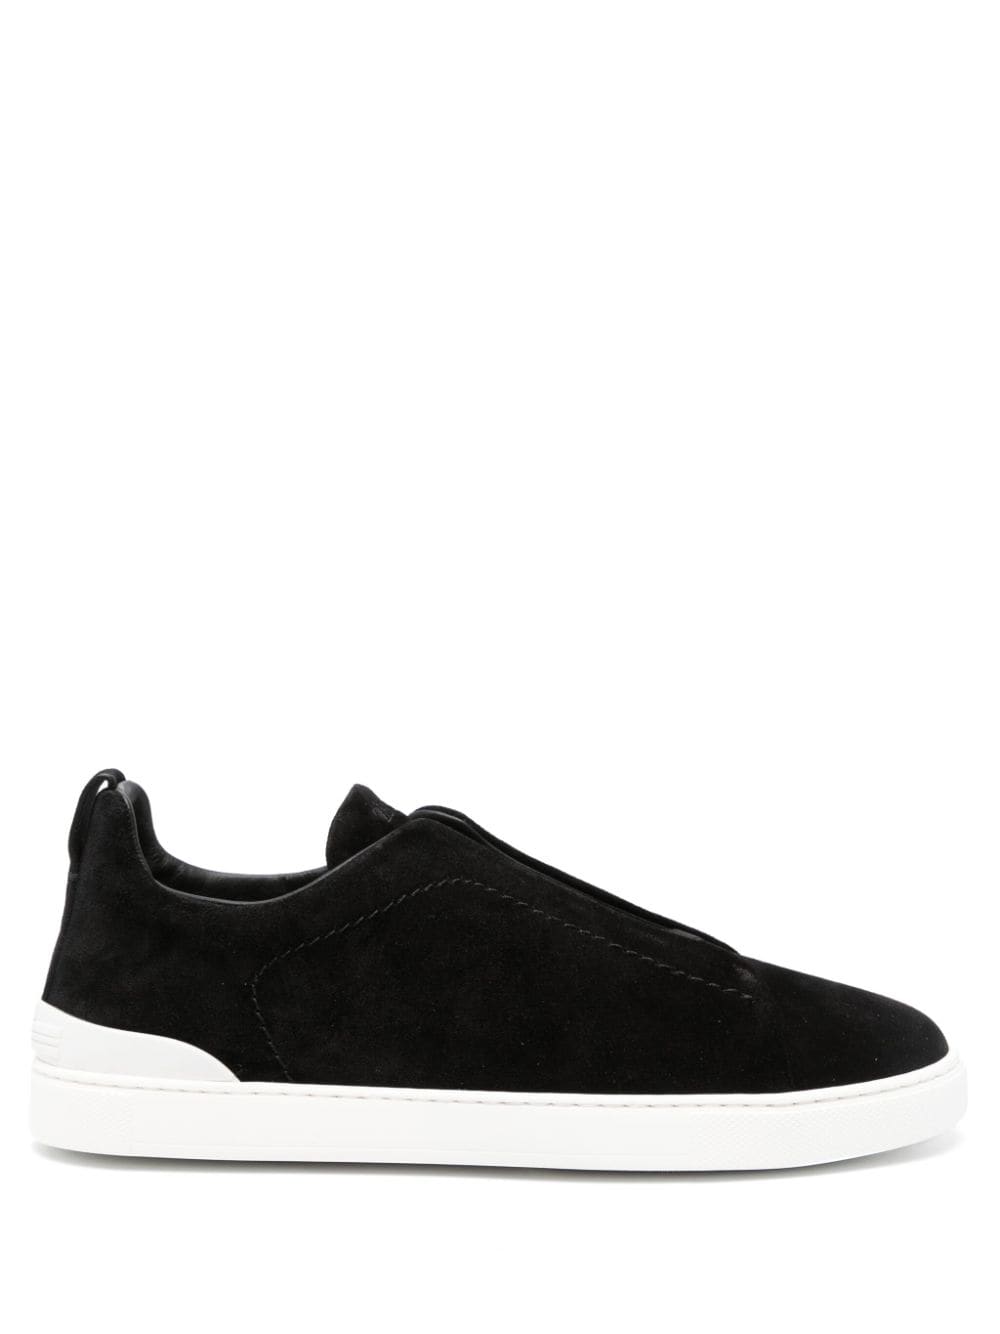 Image 1 of Zegna Triple Stitch leather sneakers